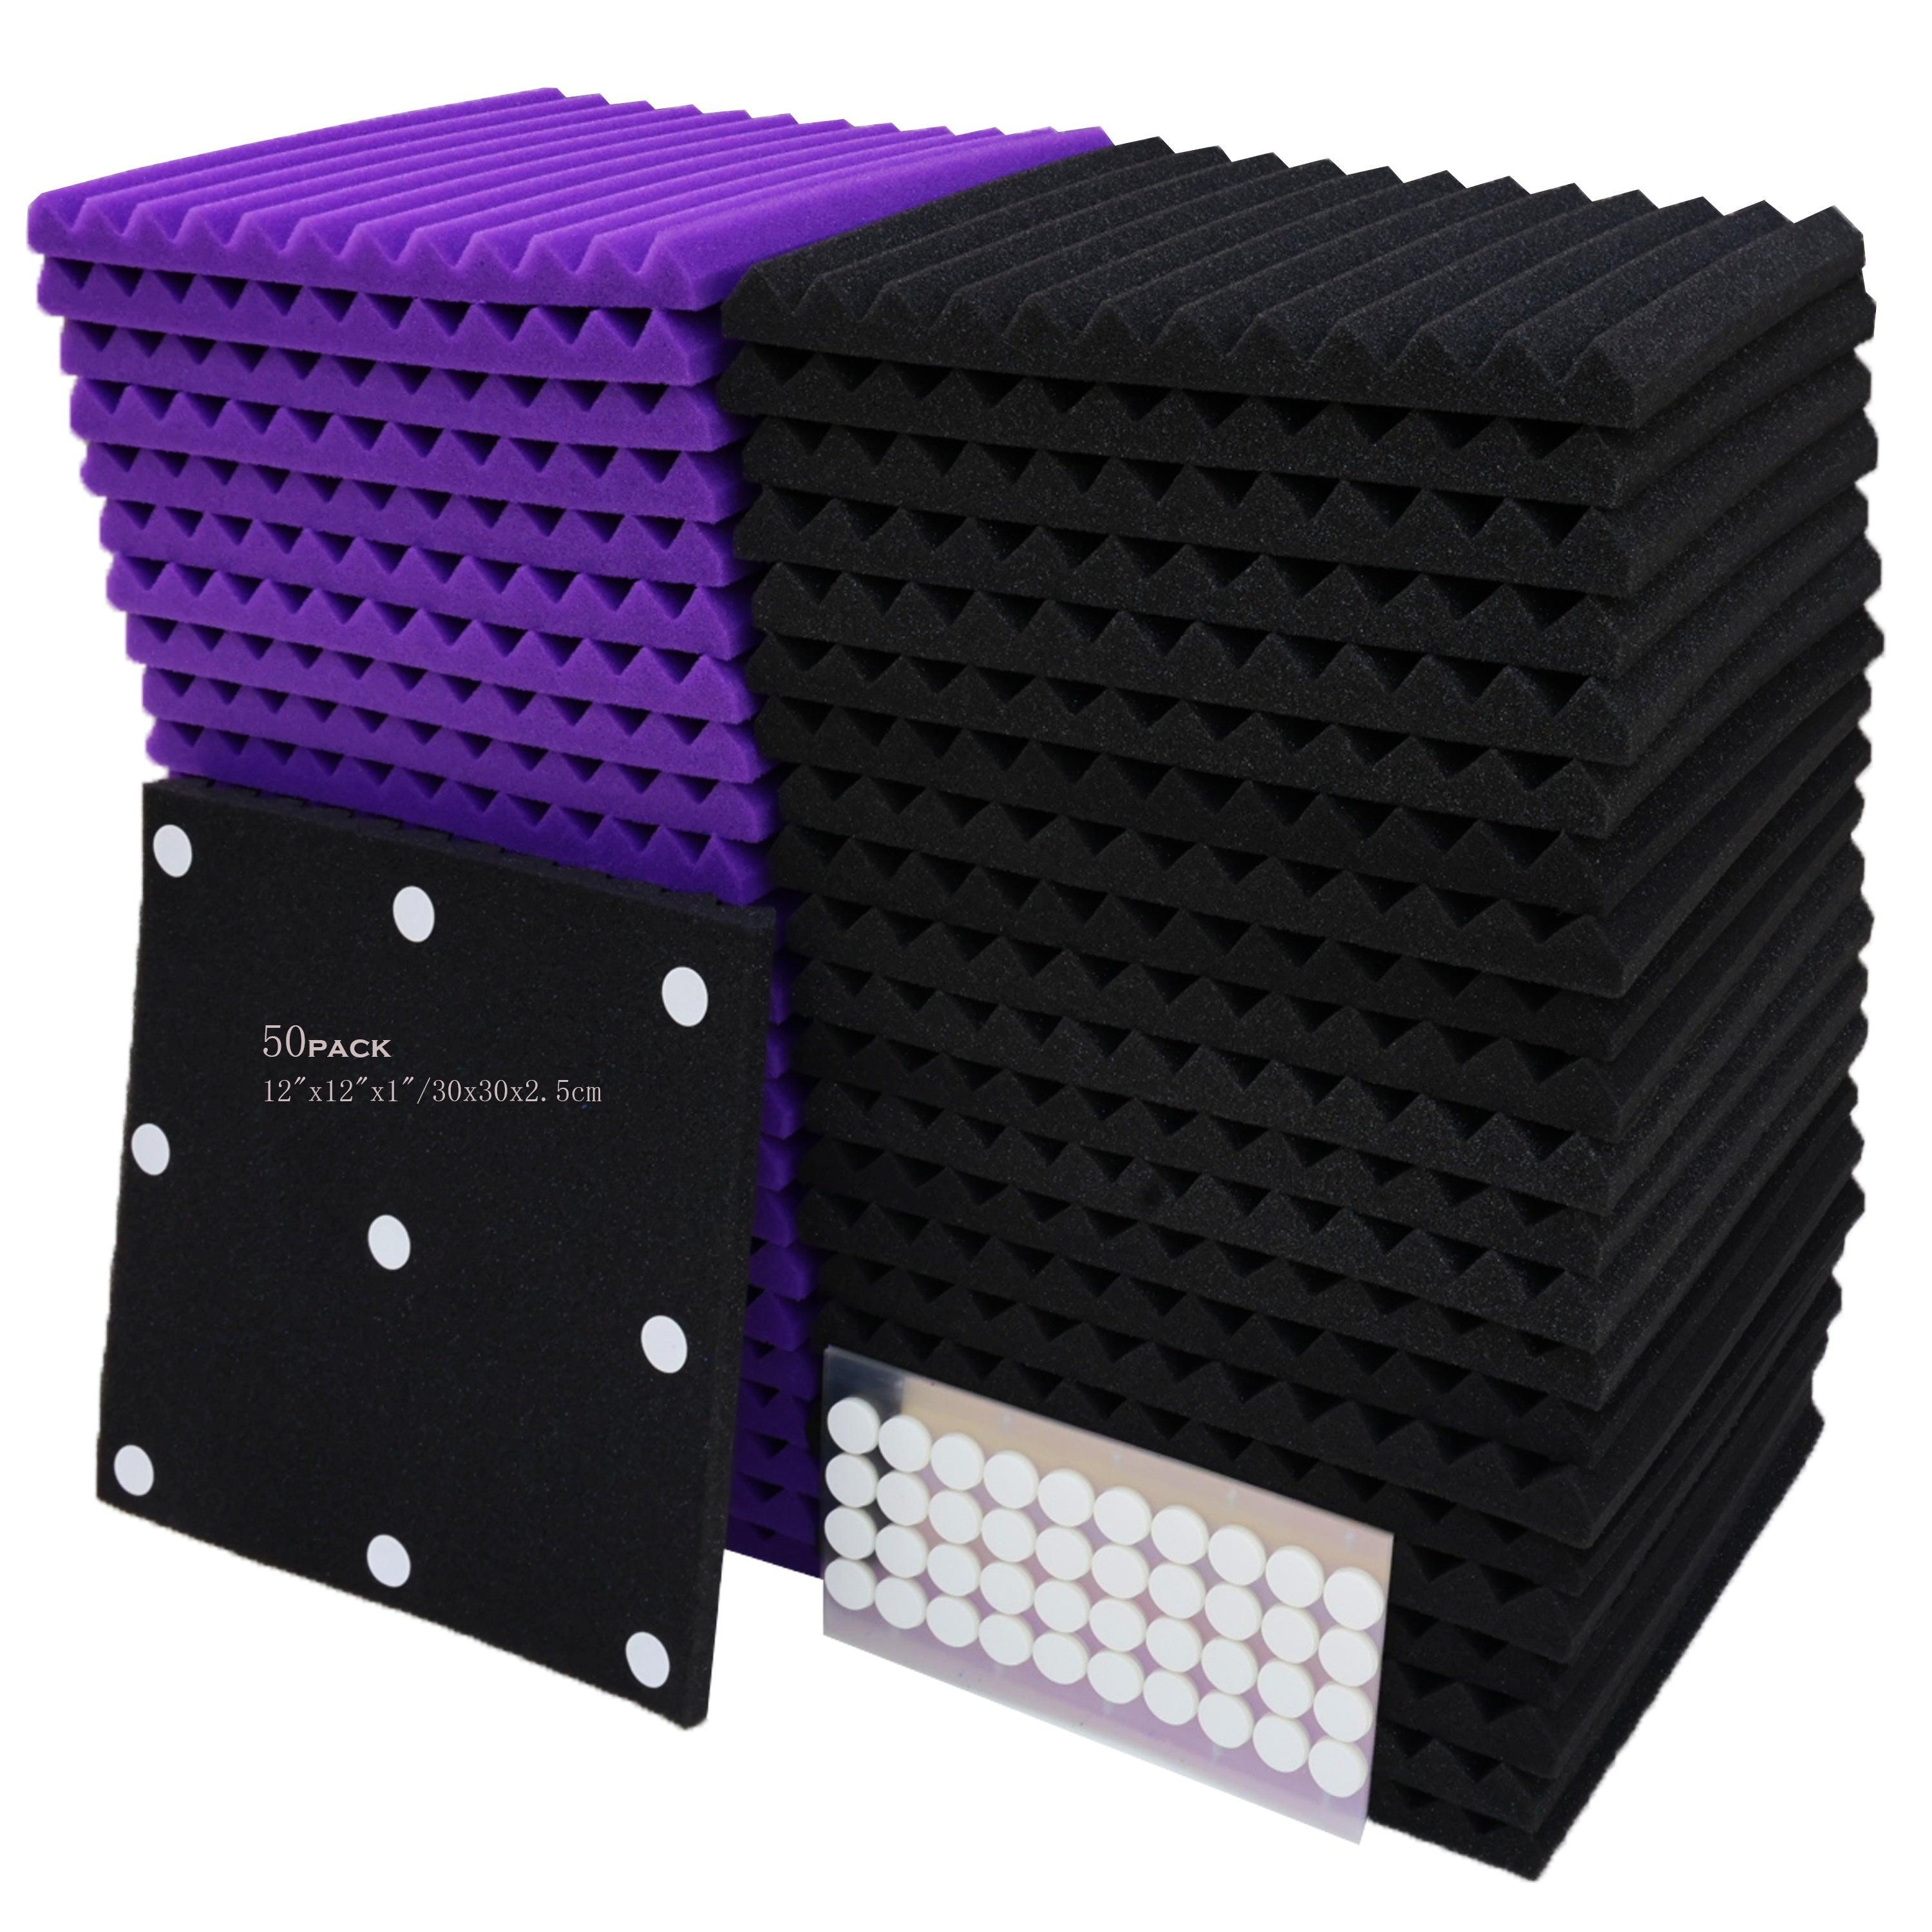 50-pack-studio-enhancing-high-density-foam-acoustic-wedges-30x30x2-5cm-black-purple-soundproofing-tiles-for-superior-sound-absorption-reduced-echoes